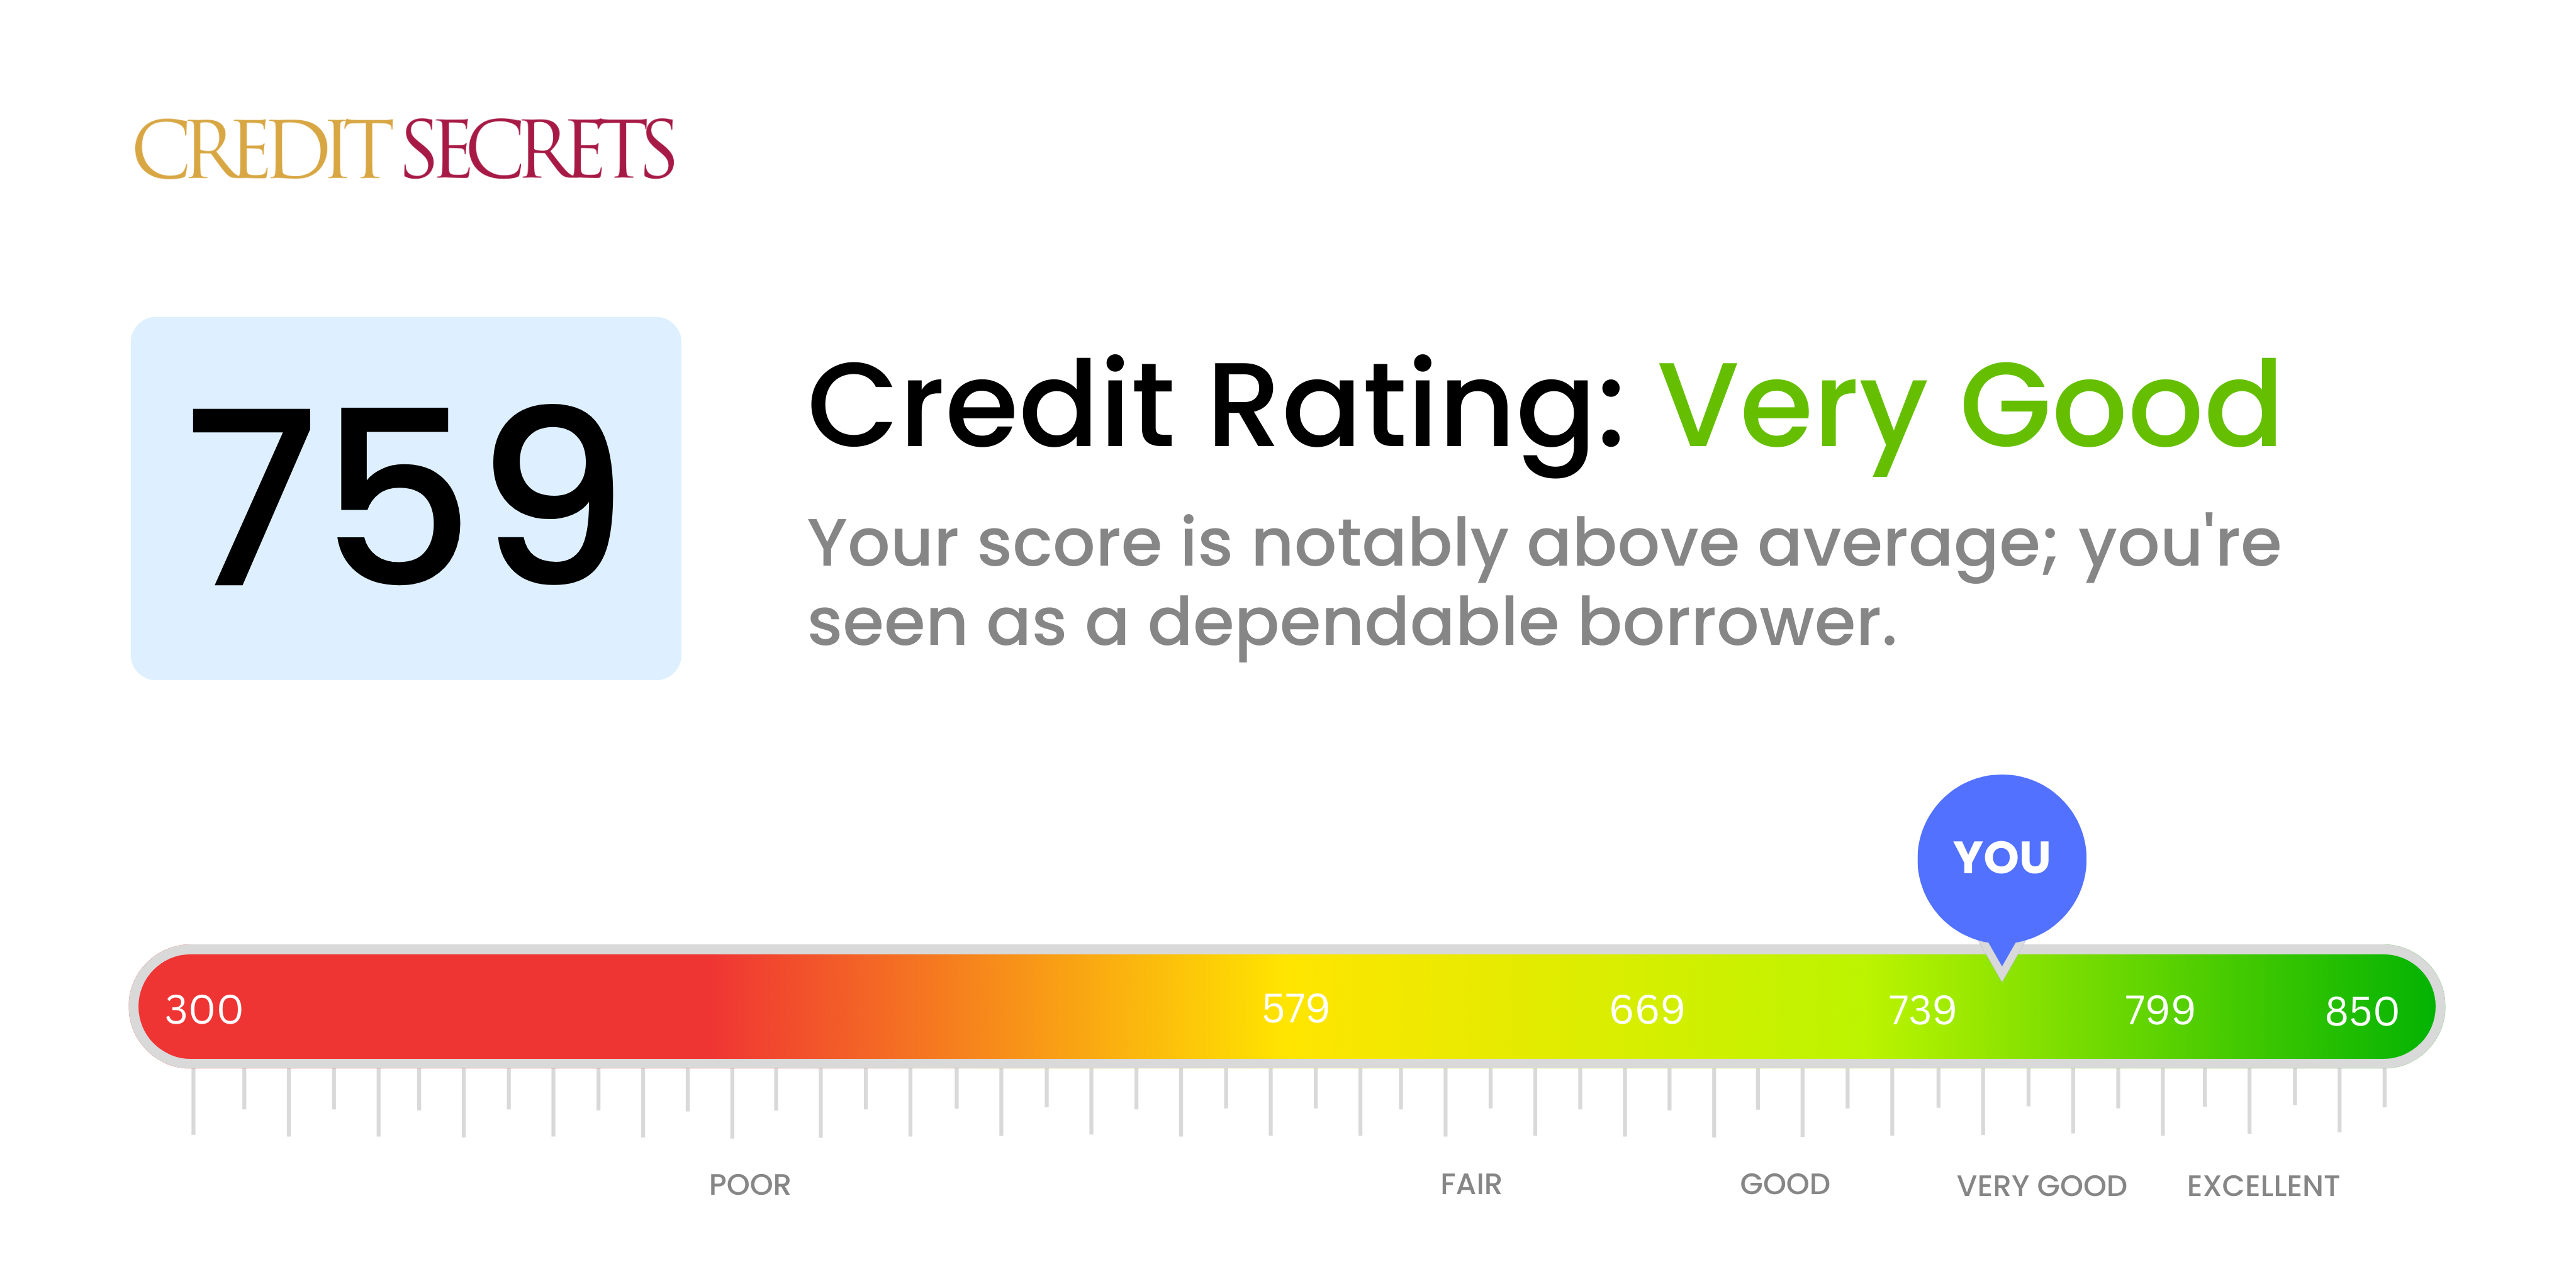 Is 759 a good credit score?